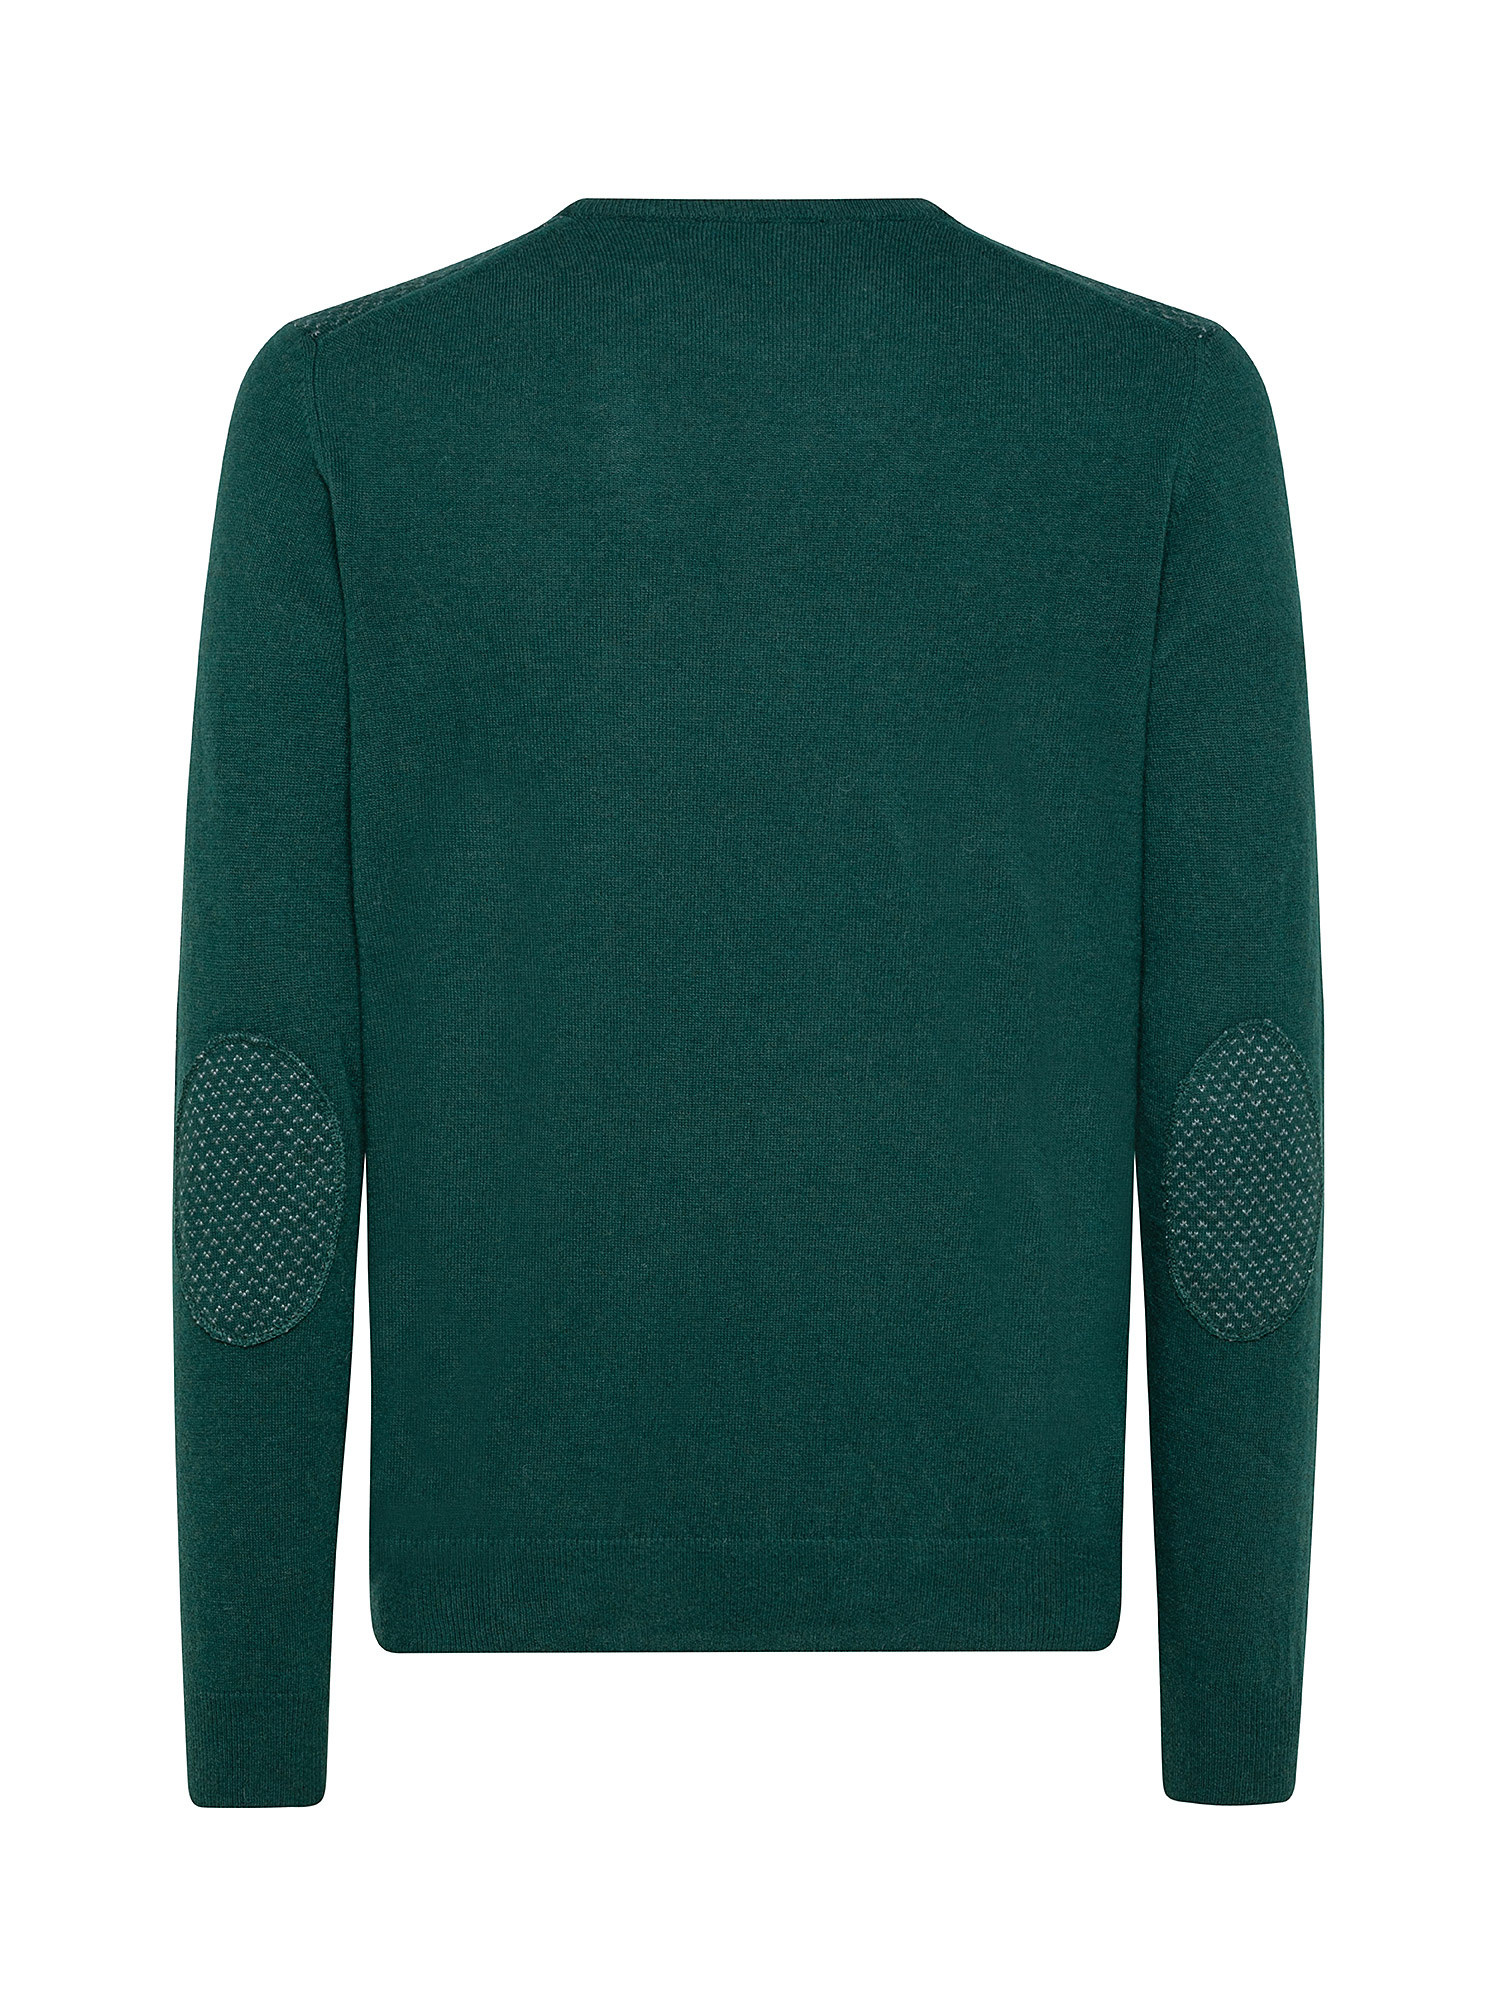 Pullover girocollo basic, Verde, large image number 1